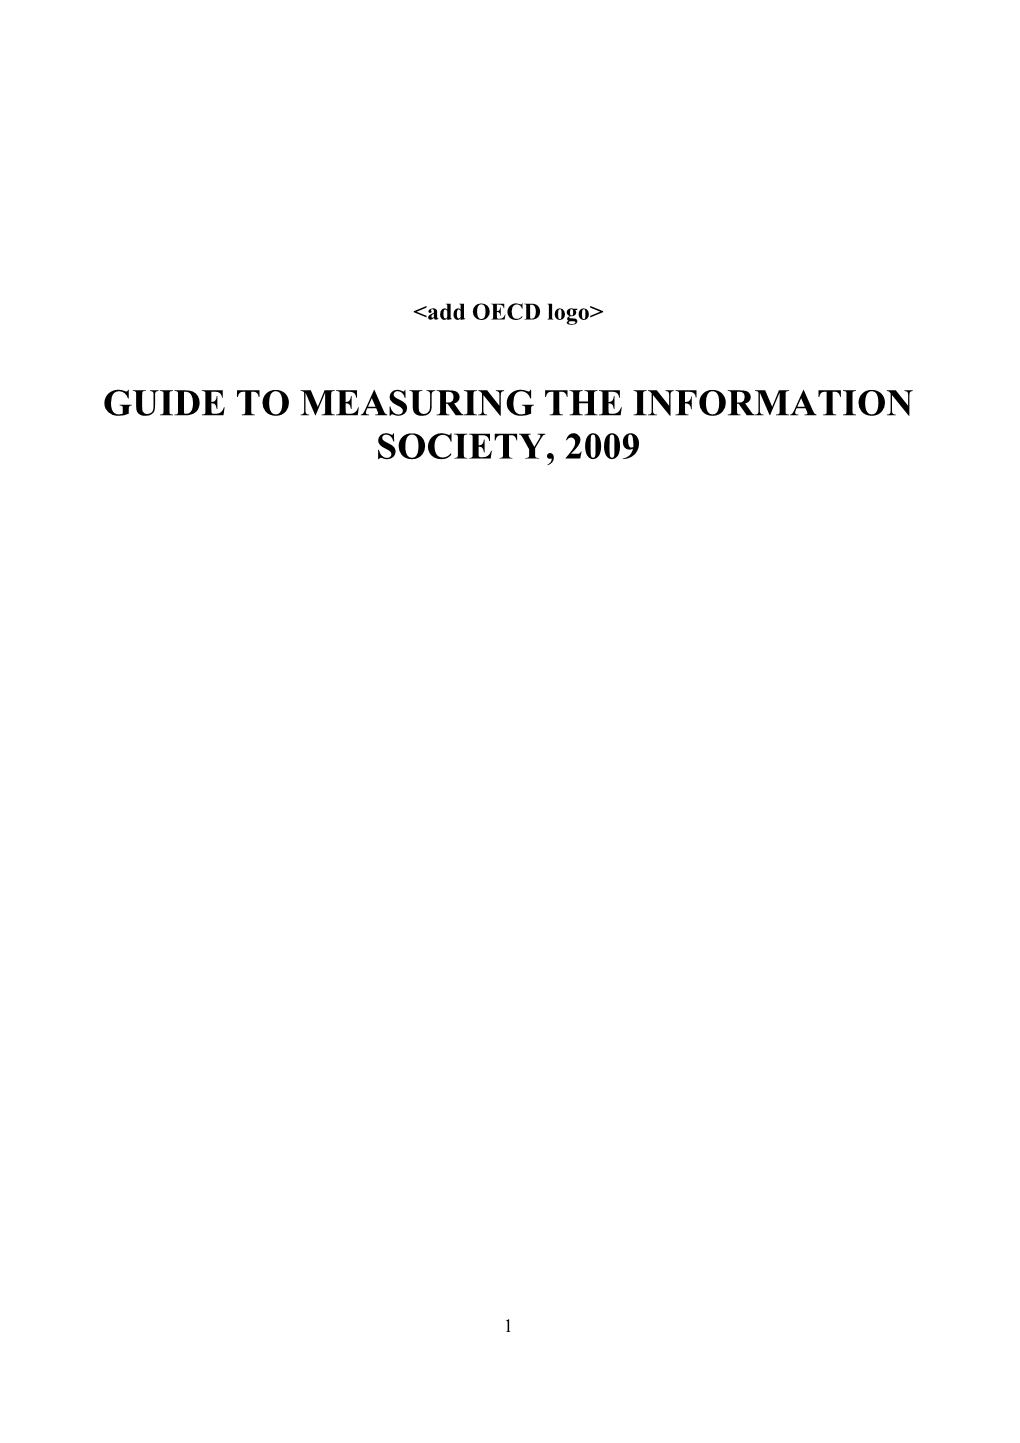 Guide 2009 Revised Complete